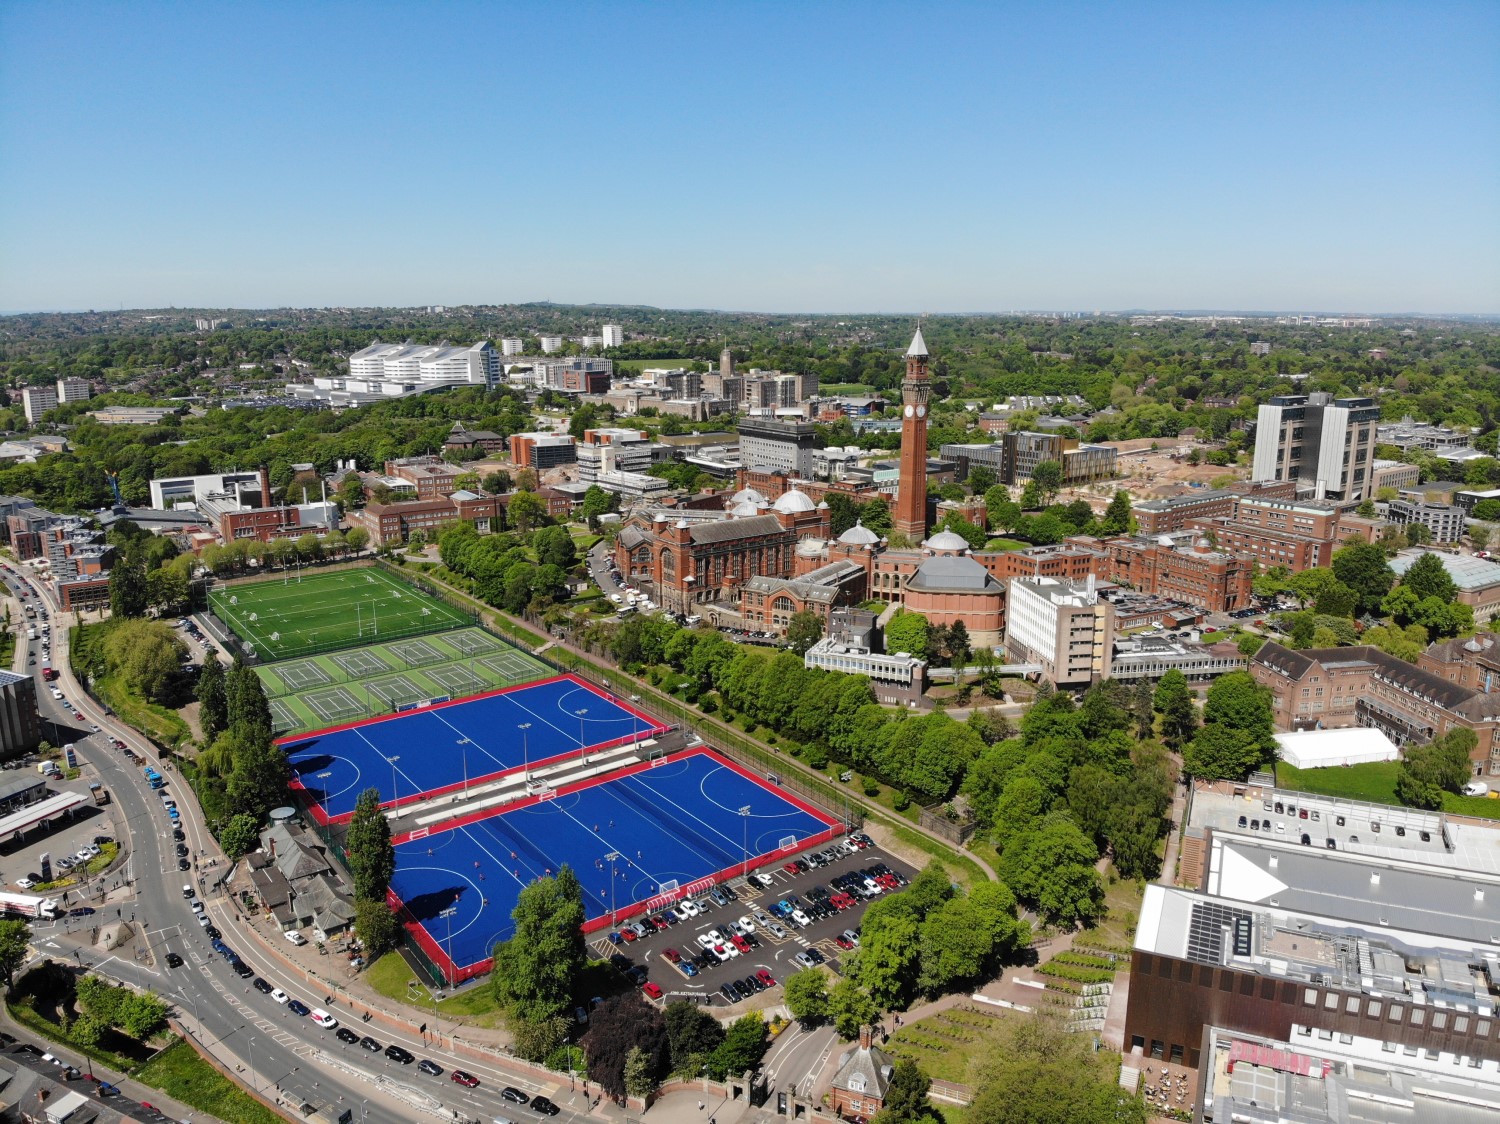 Aerial shot of the University of Birmingham's Edgbaston campus, with the sports centre and Metchley Lane pitches in the foreground.